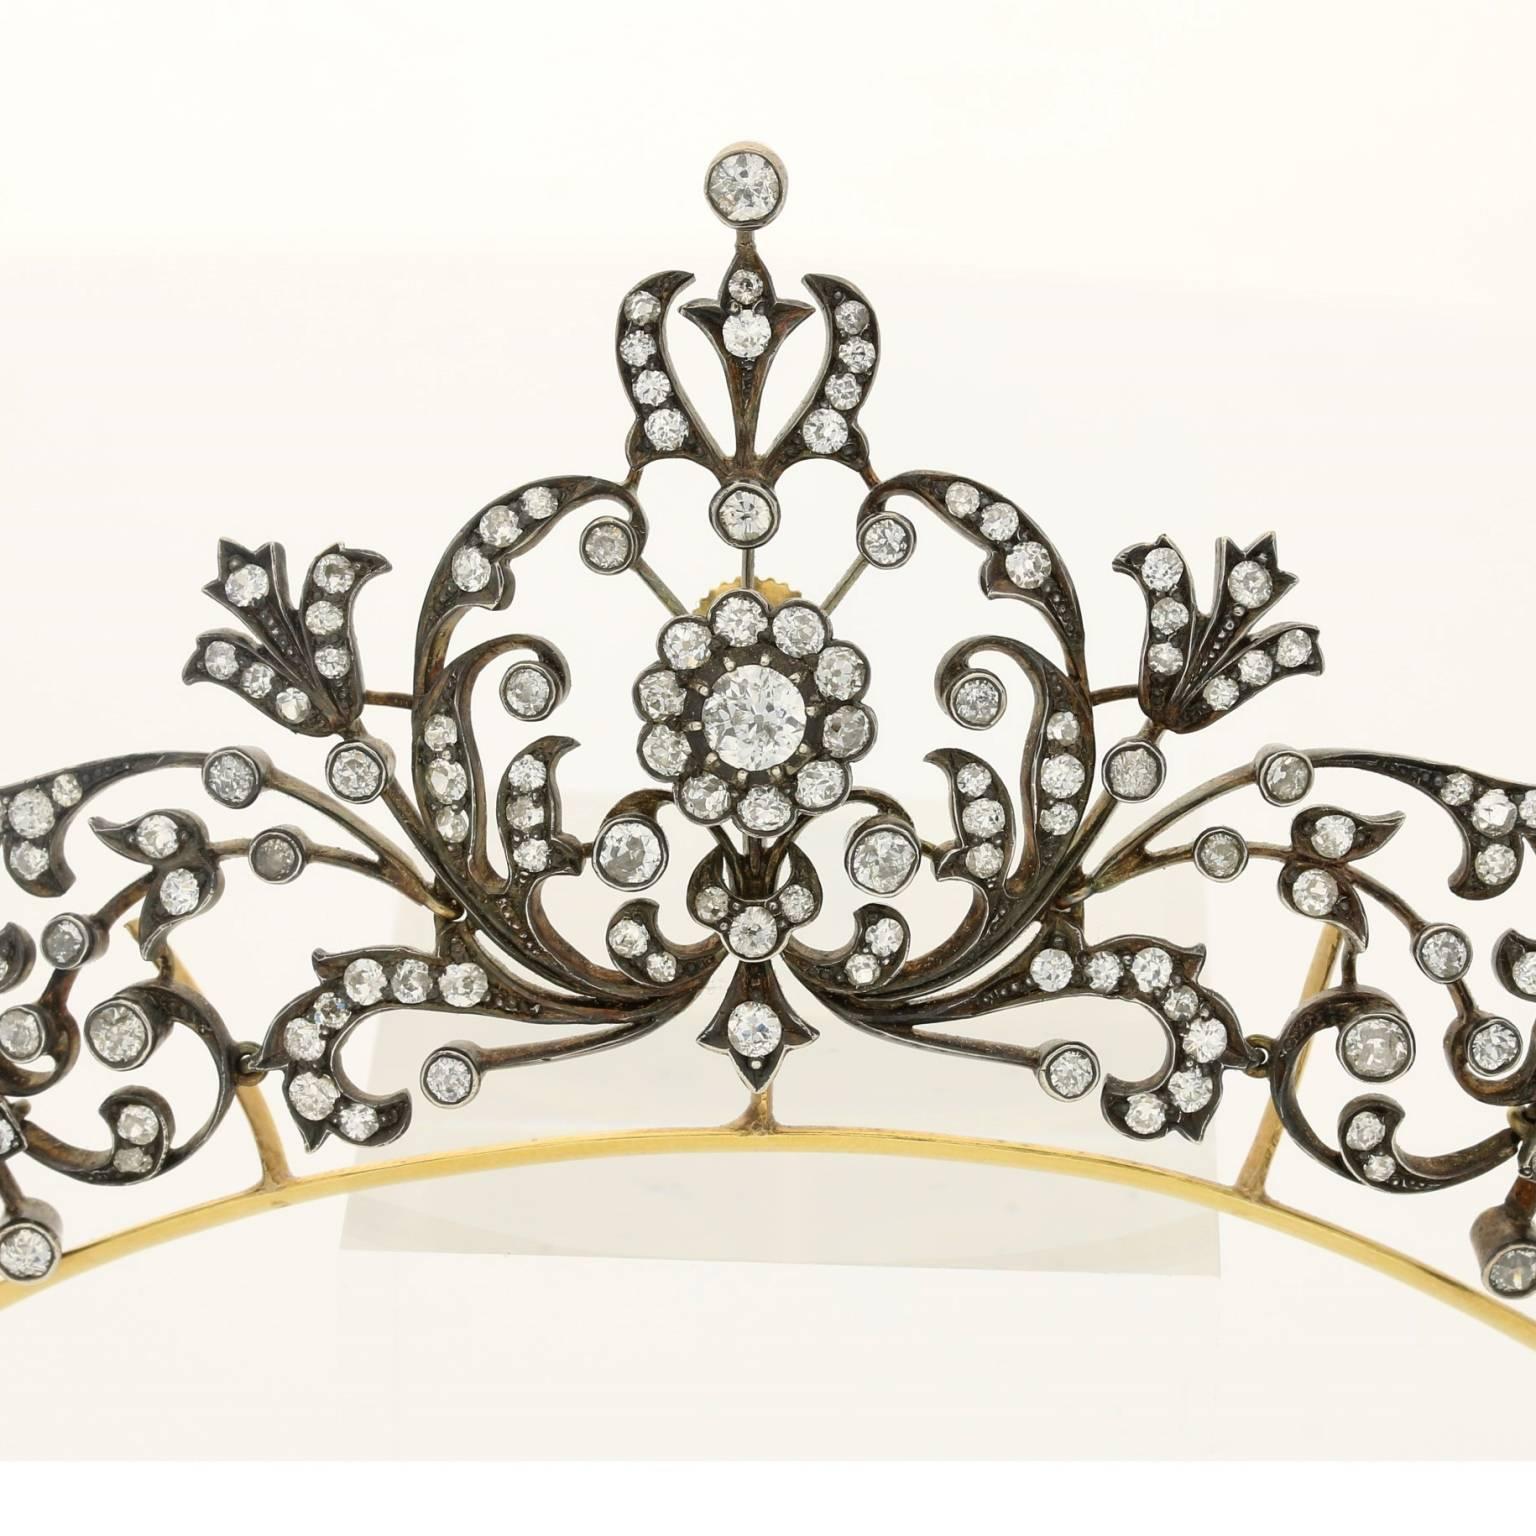 Diamond tiara / necklace of scrolling floral and foliate design with central old mine cut diamond cluster among a graduated openwork panel raised on a plain frame with detachable backchain mounted in silver and gold.

Victorian circa